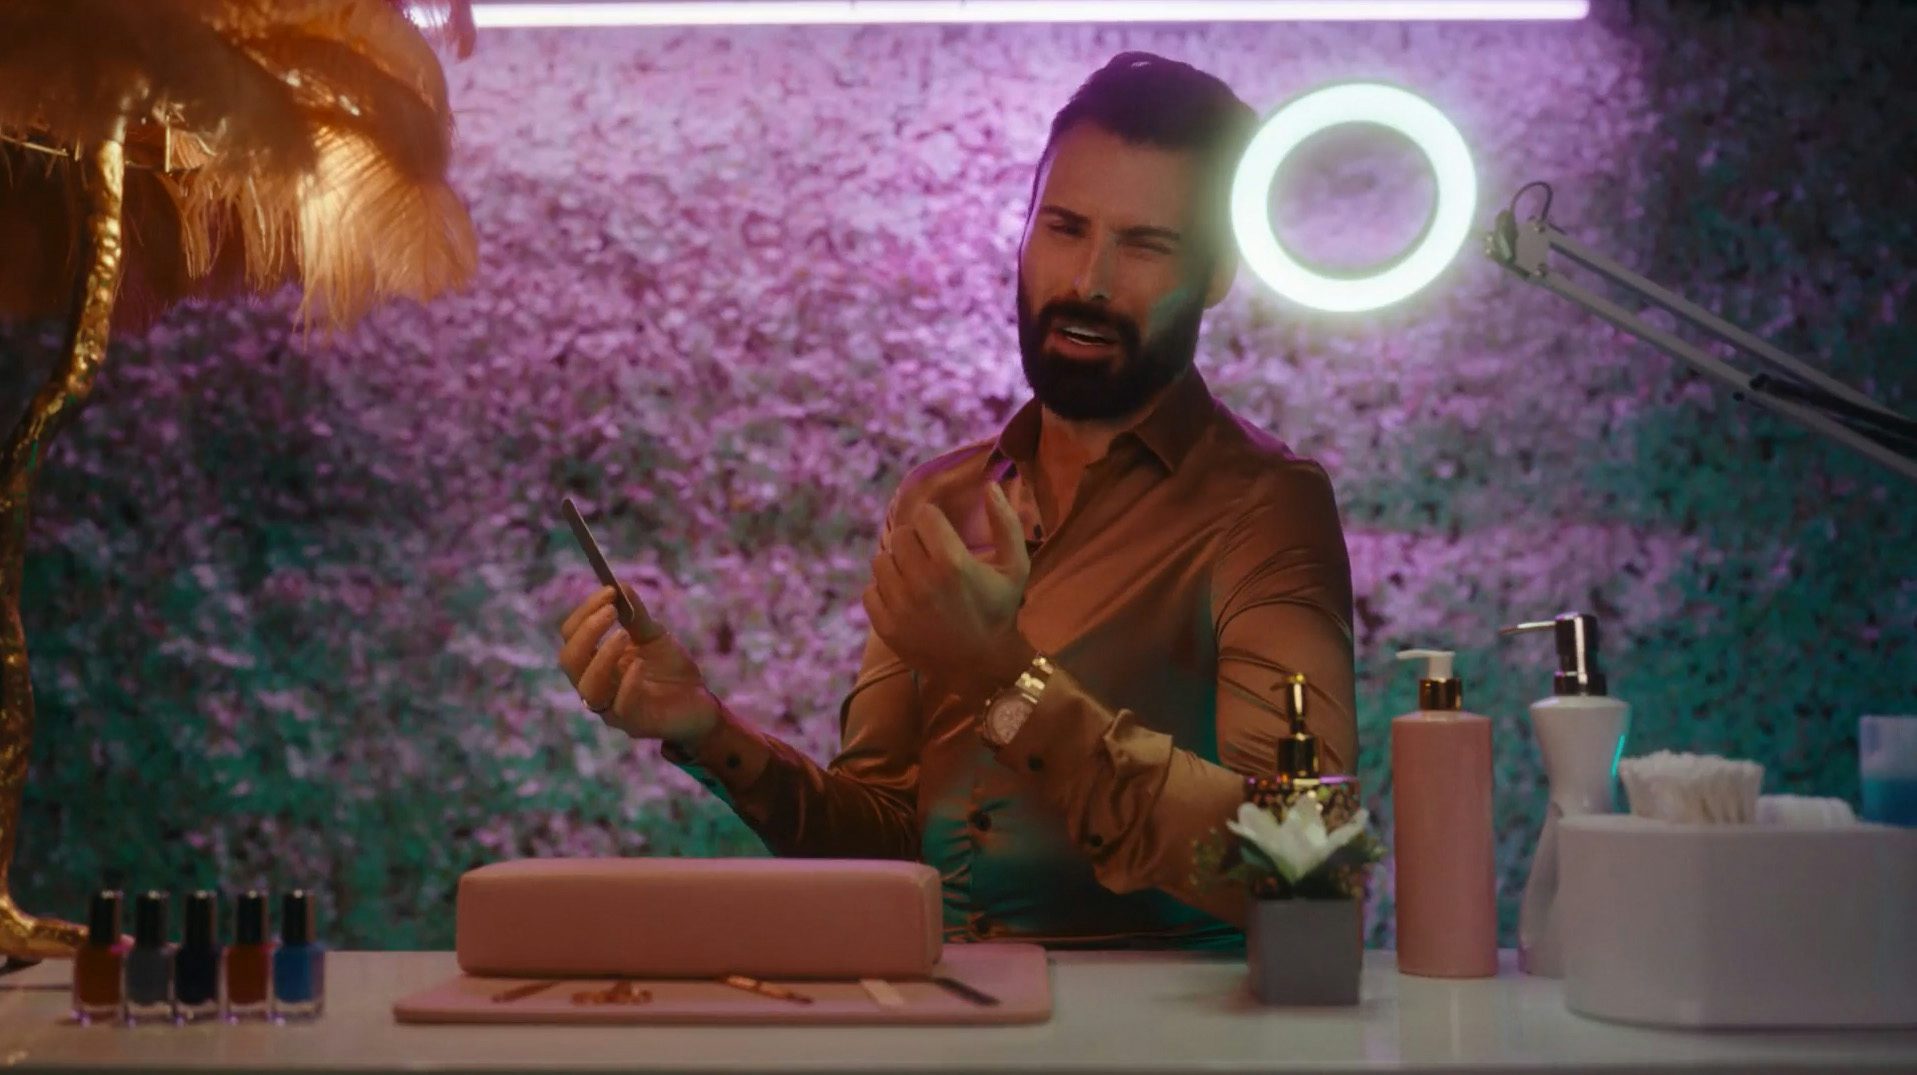 Still from the BBC Eurovision 2023 ad showing TV presenter Rylan holding a nail file while sat at a beauty station